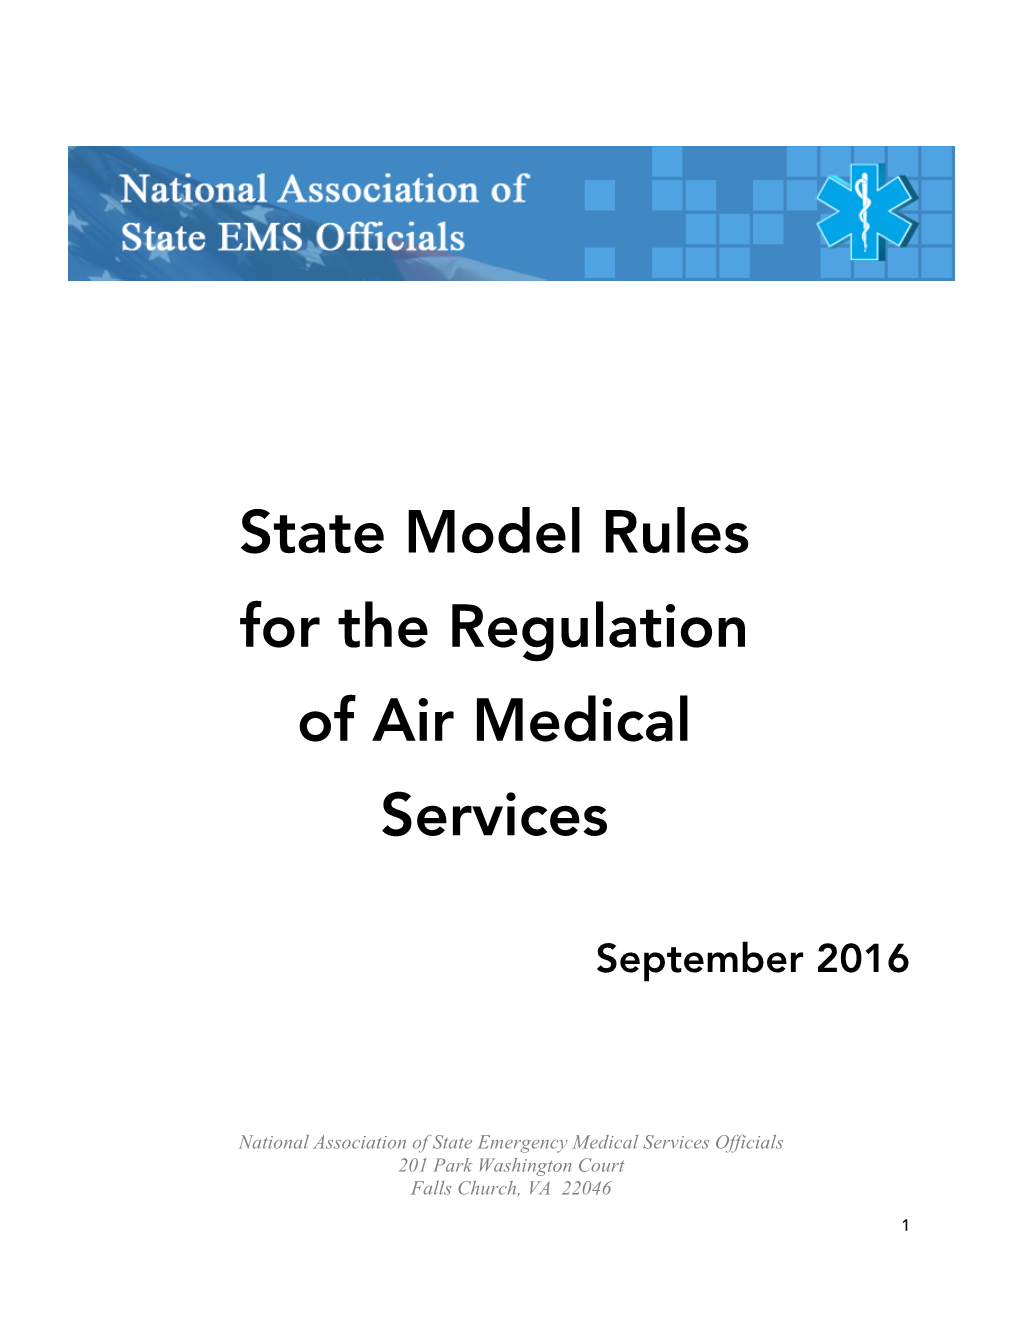 State Model Rules for the Regulation of Air Medical Services